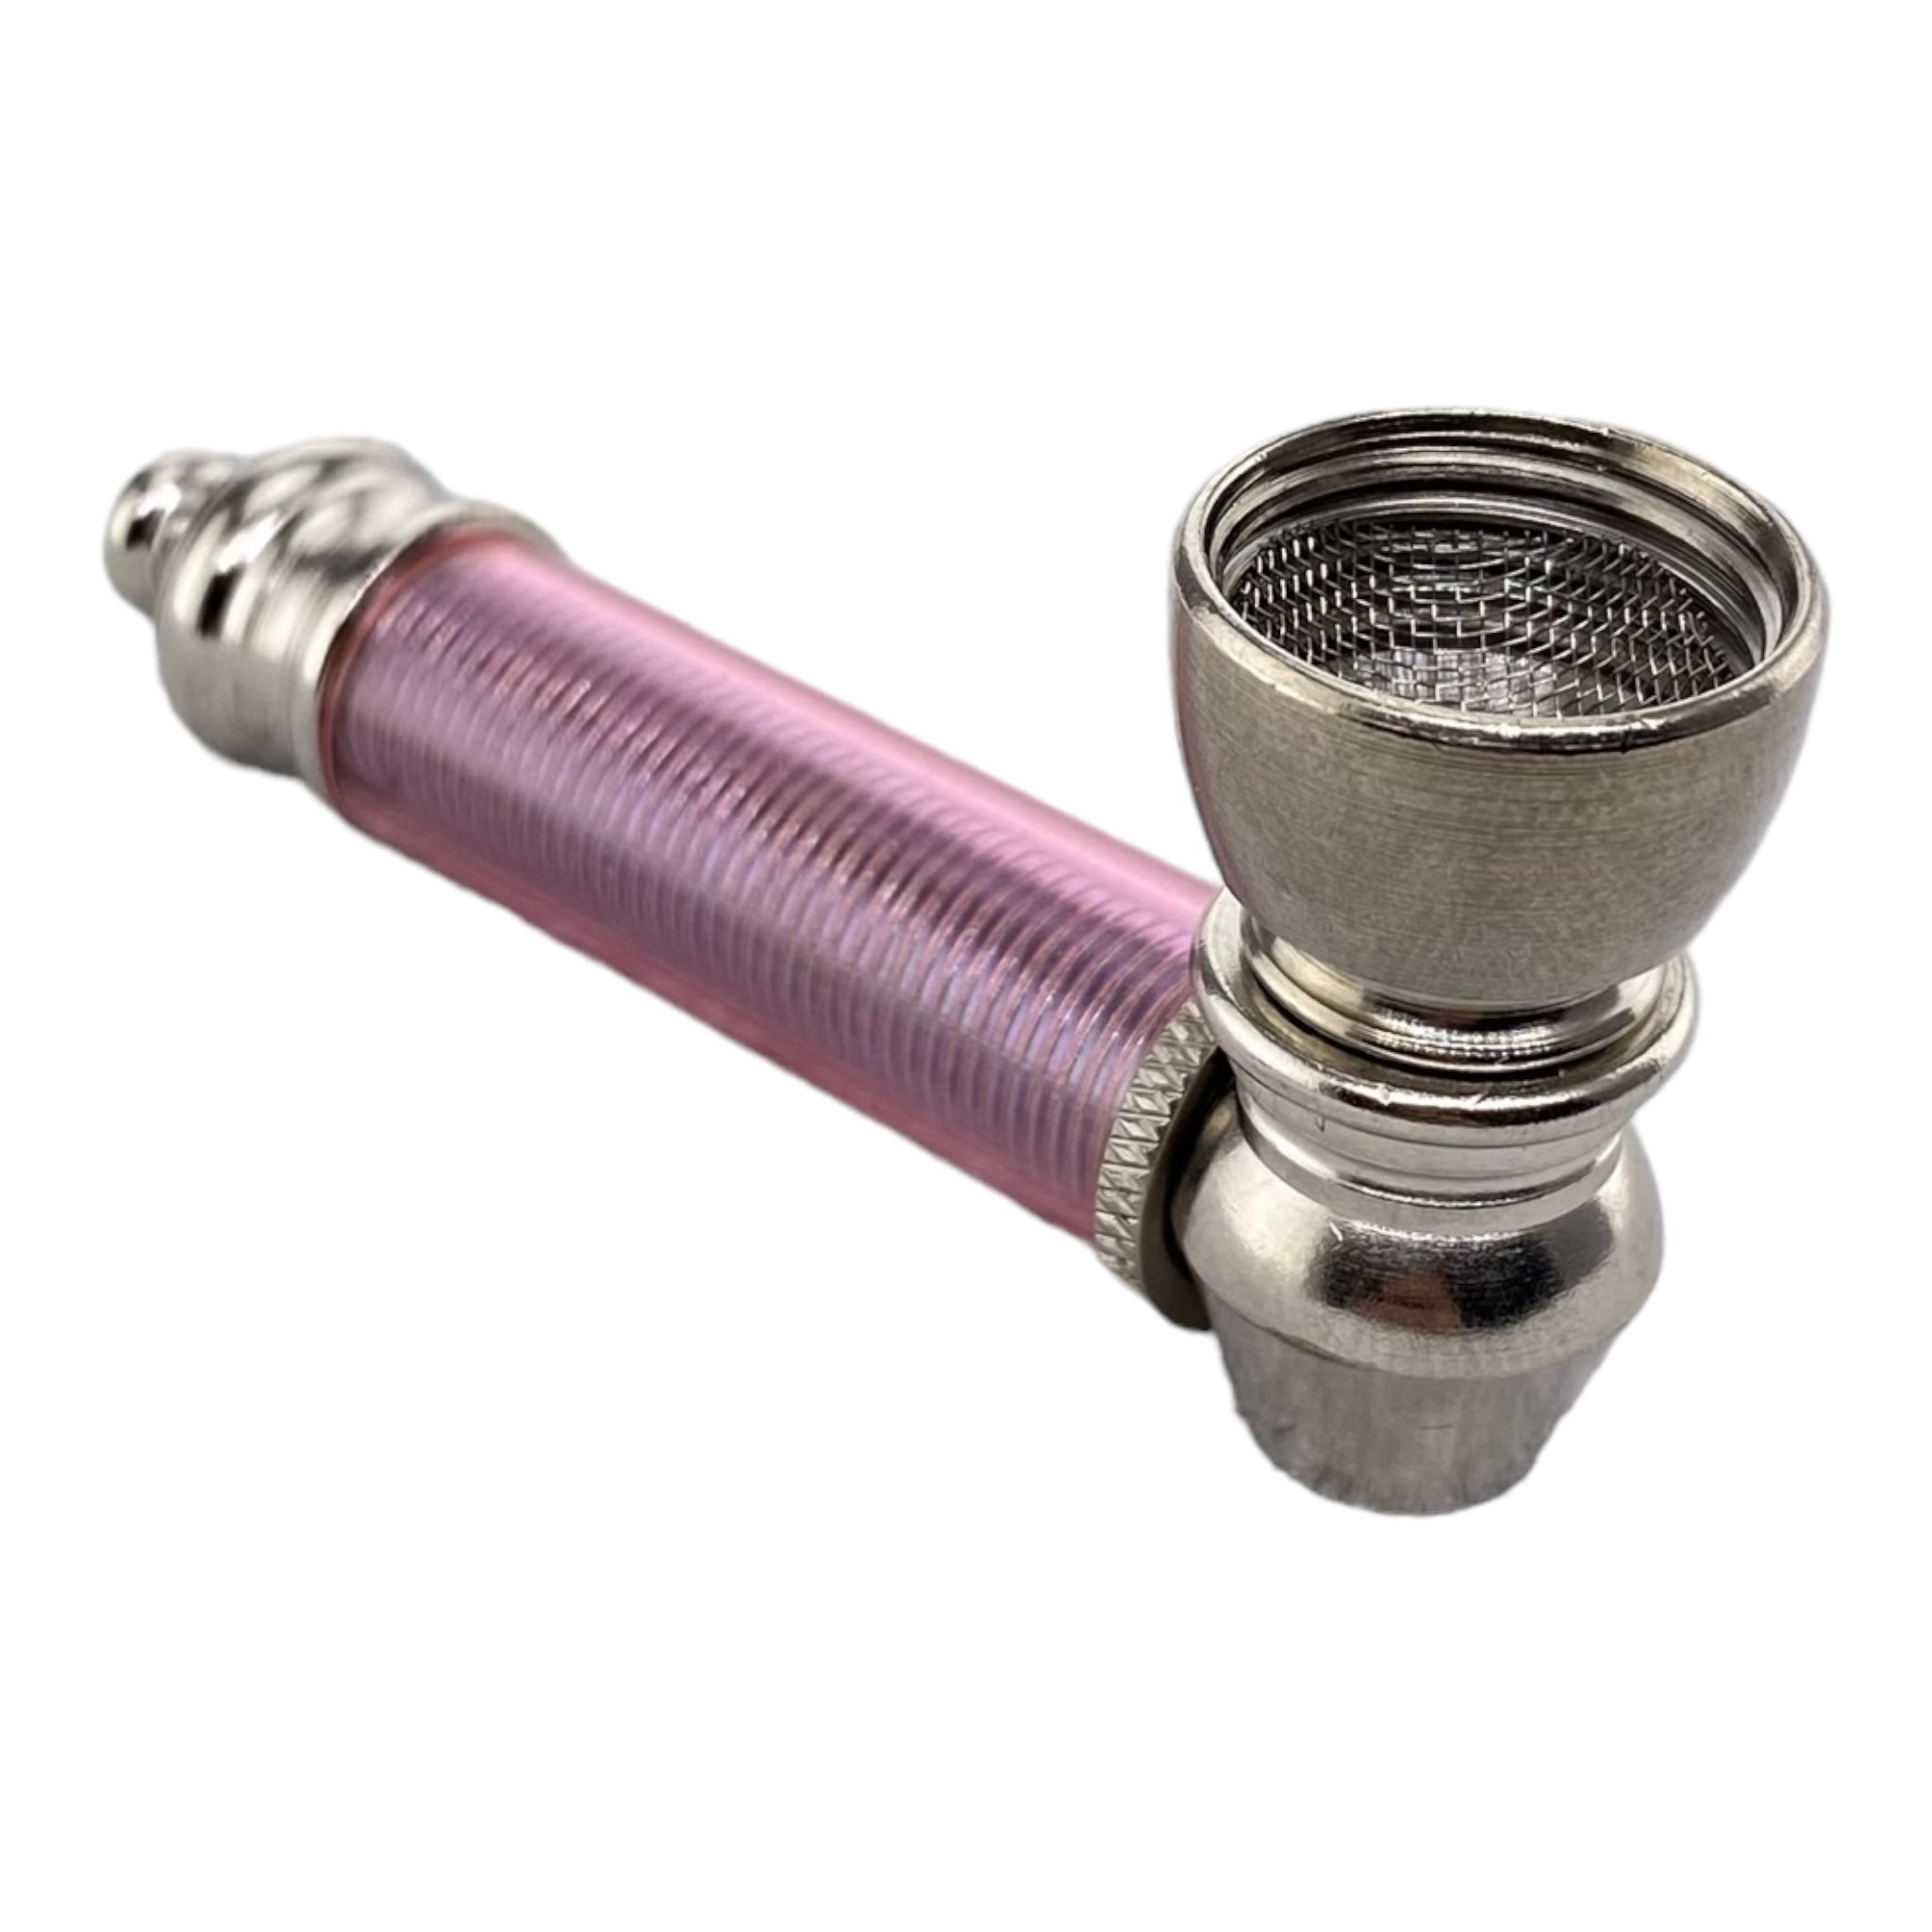 Metal Hand Pipes - Silver Chrome Hand Pipe With Pink Plastic Stem